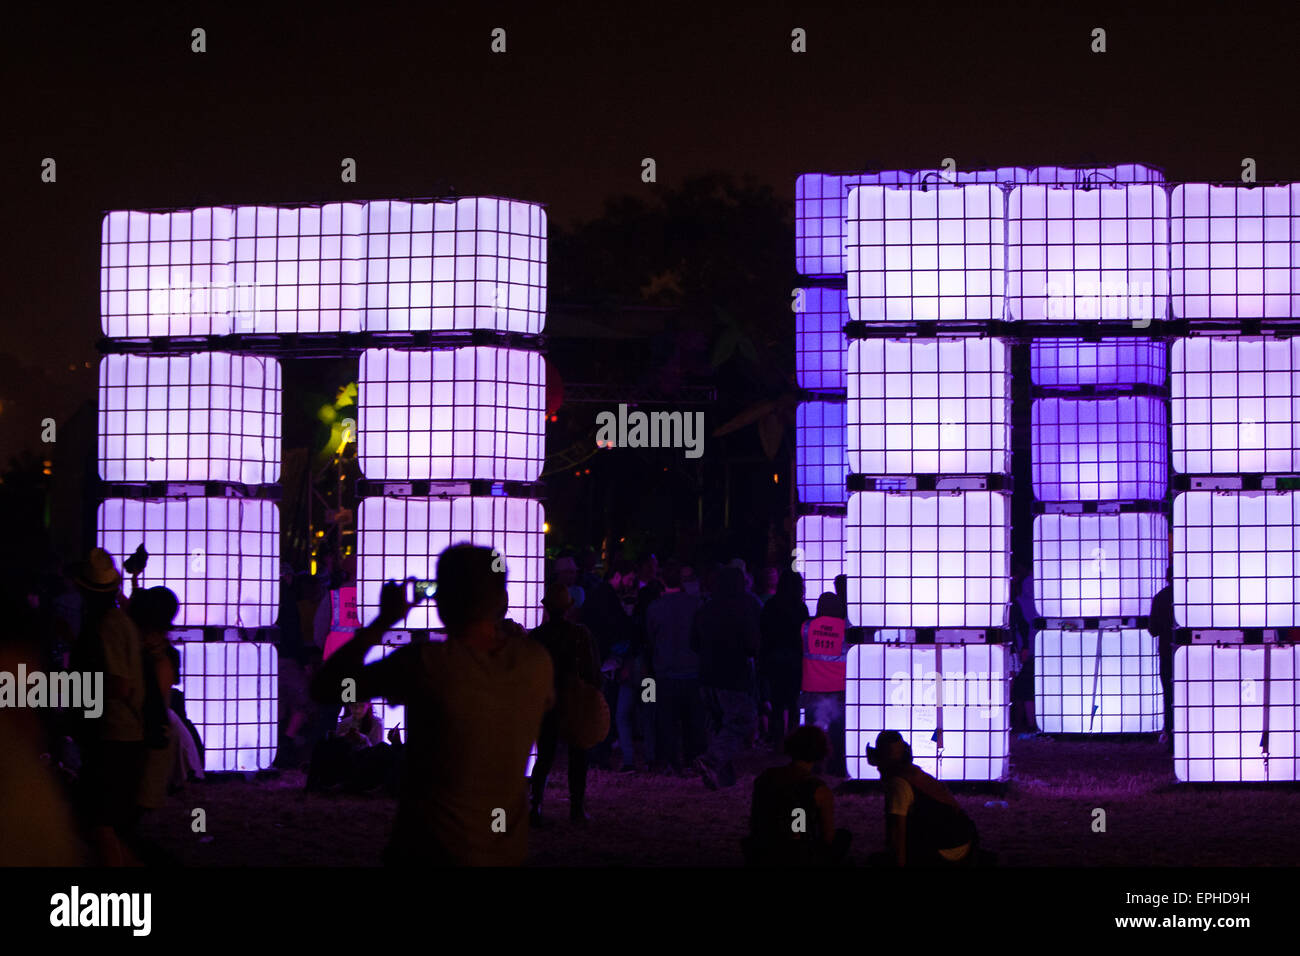 Replica of Stonehenge made of cubes of light at this performance space at the Dance Tent zone at Glastonbury Festival/ 'Glasto'  Stock Photo